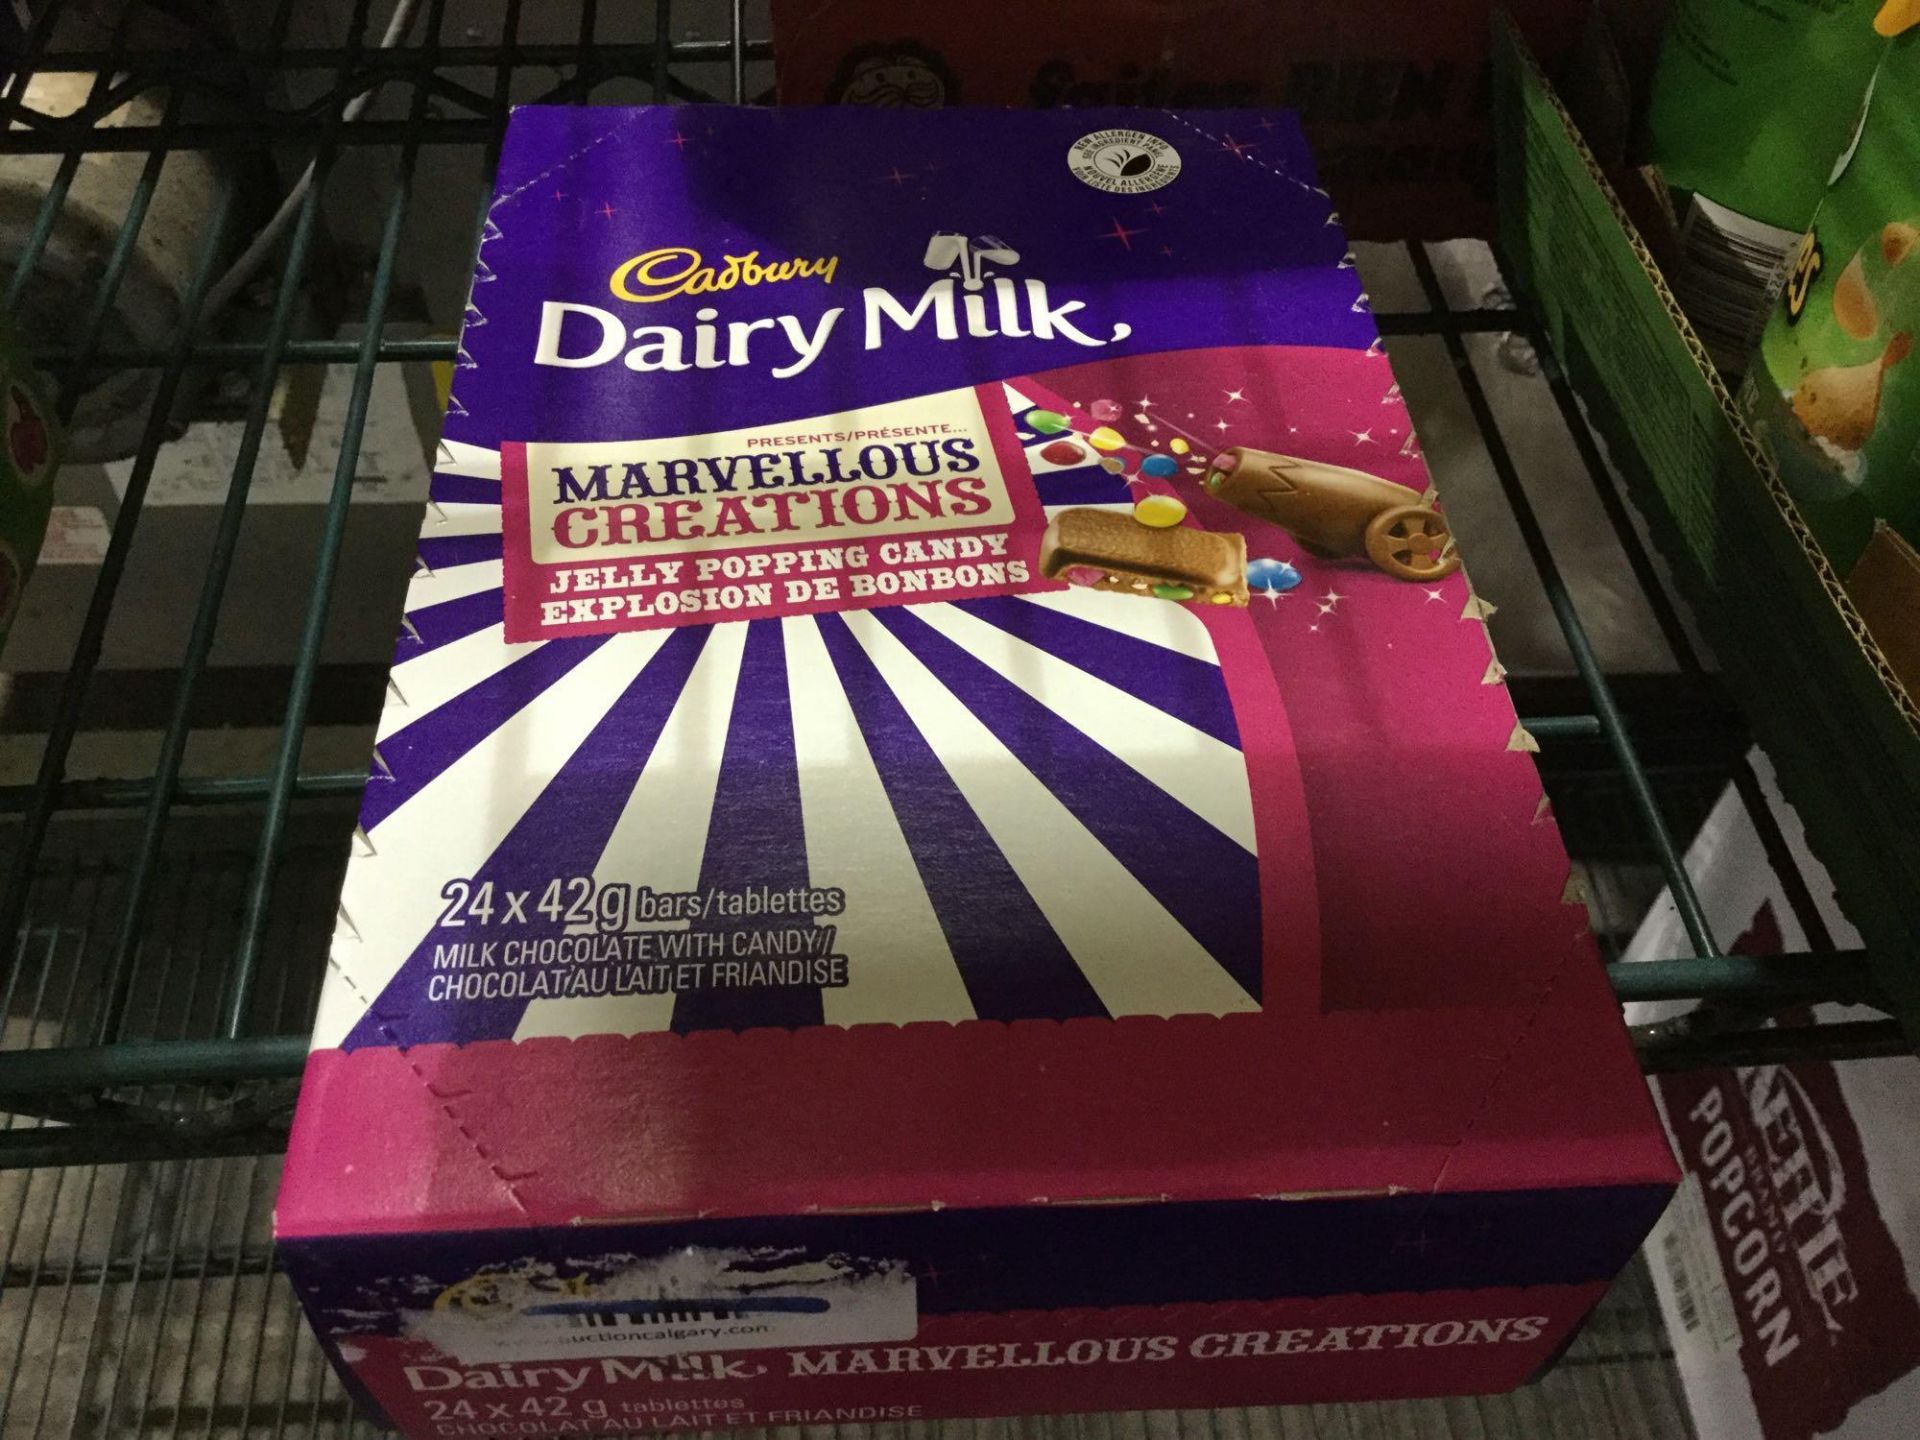 Case of 24 x 42 g Dairy Milk Marvellous Creations Chocolate Bars